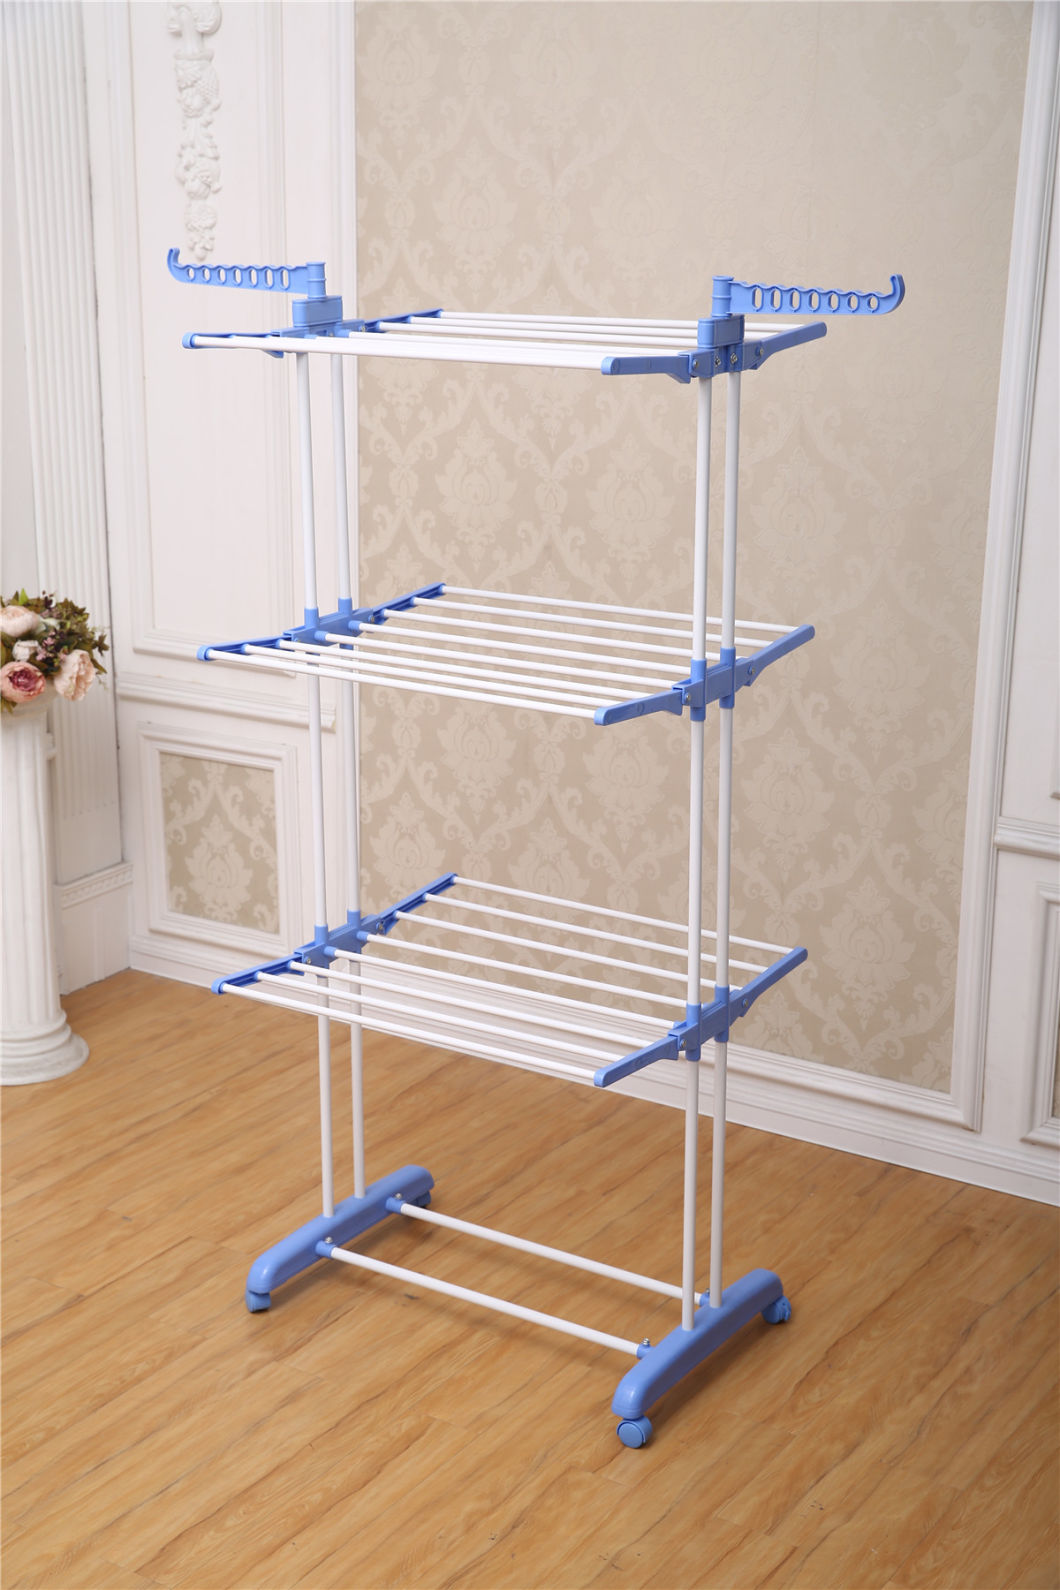 New PP Three Layers Baby Clothes Drying Hanger (JP-CR300W)